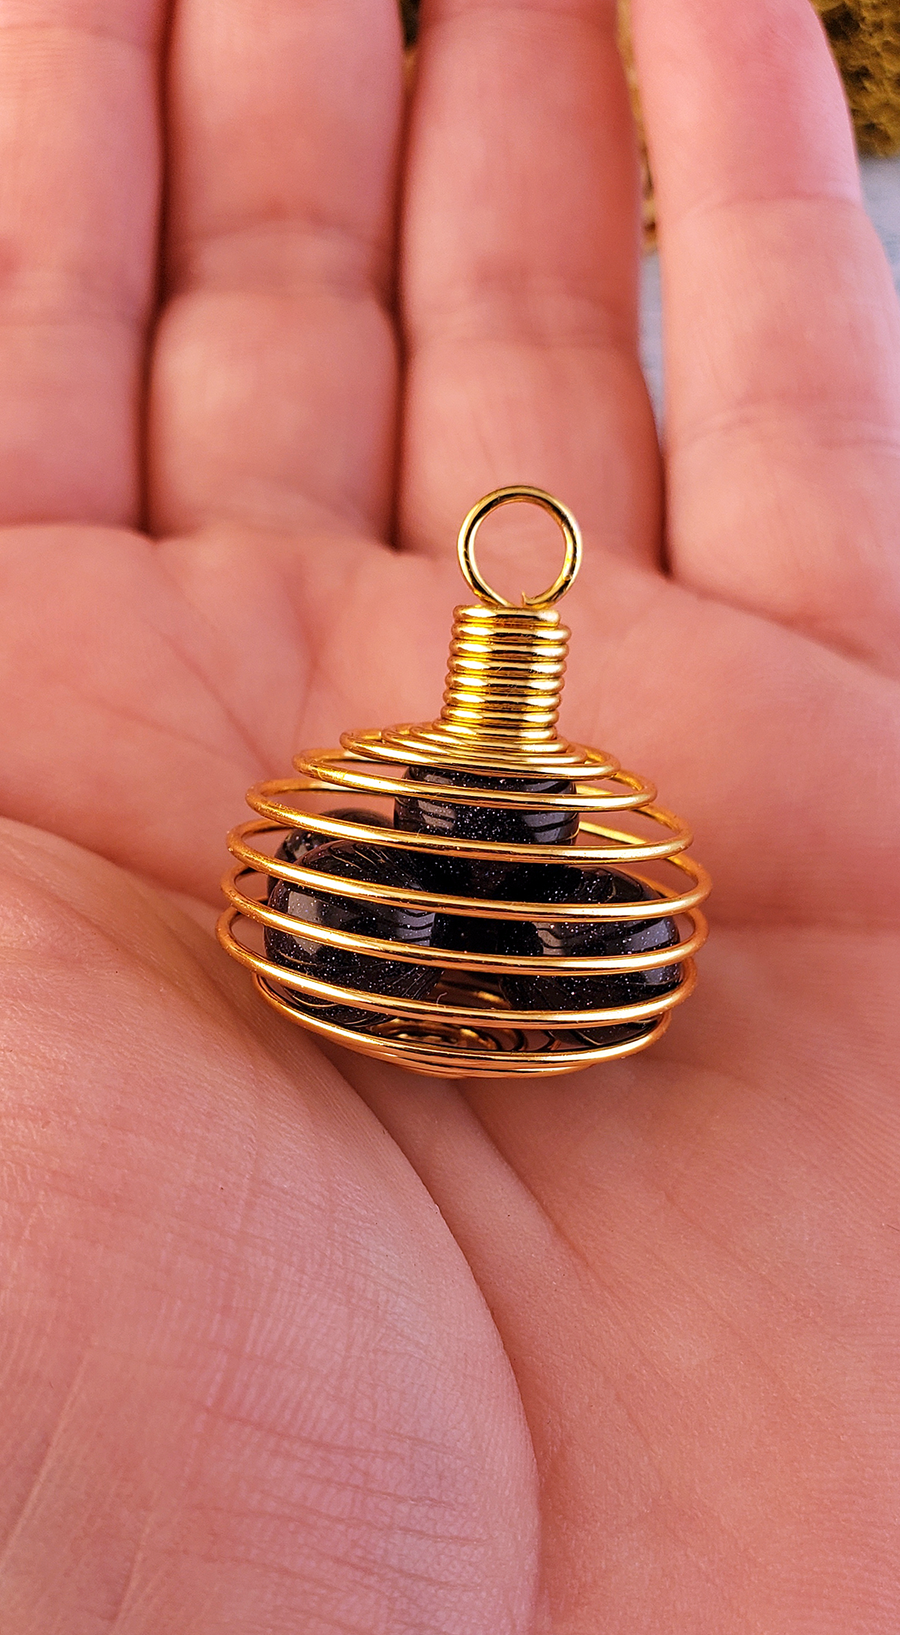 Gold-Colored Metal Spiral Cage Ornament Pendant - Perfect for Holding Gemstones or Orbs! - Full of 10mm Blue Goldstone Orbs